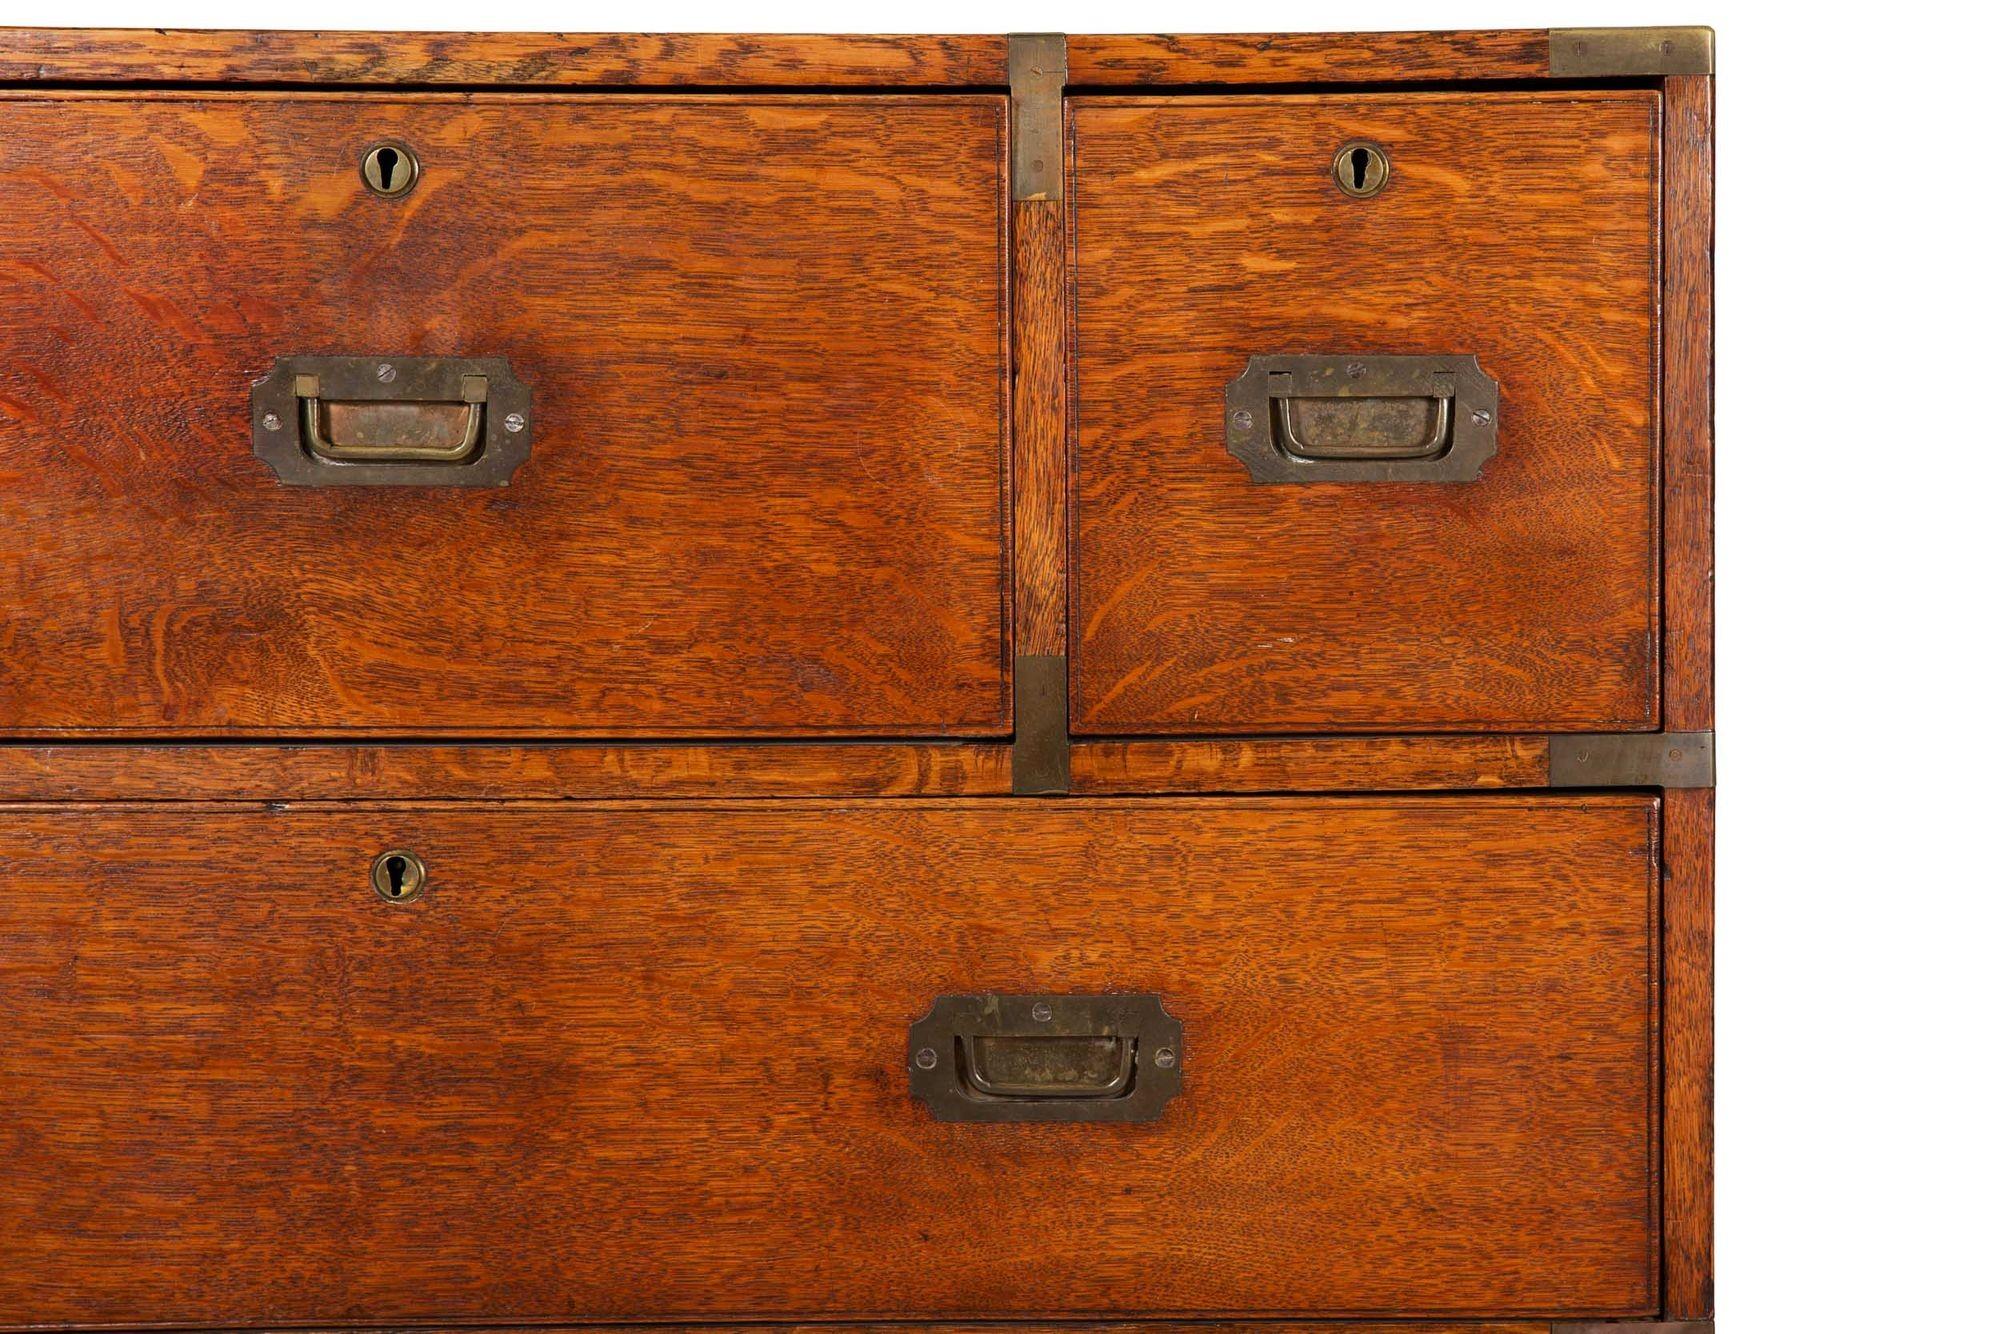 British Antique Campaign Chest of Drawers with Desk, 19th Century 1